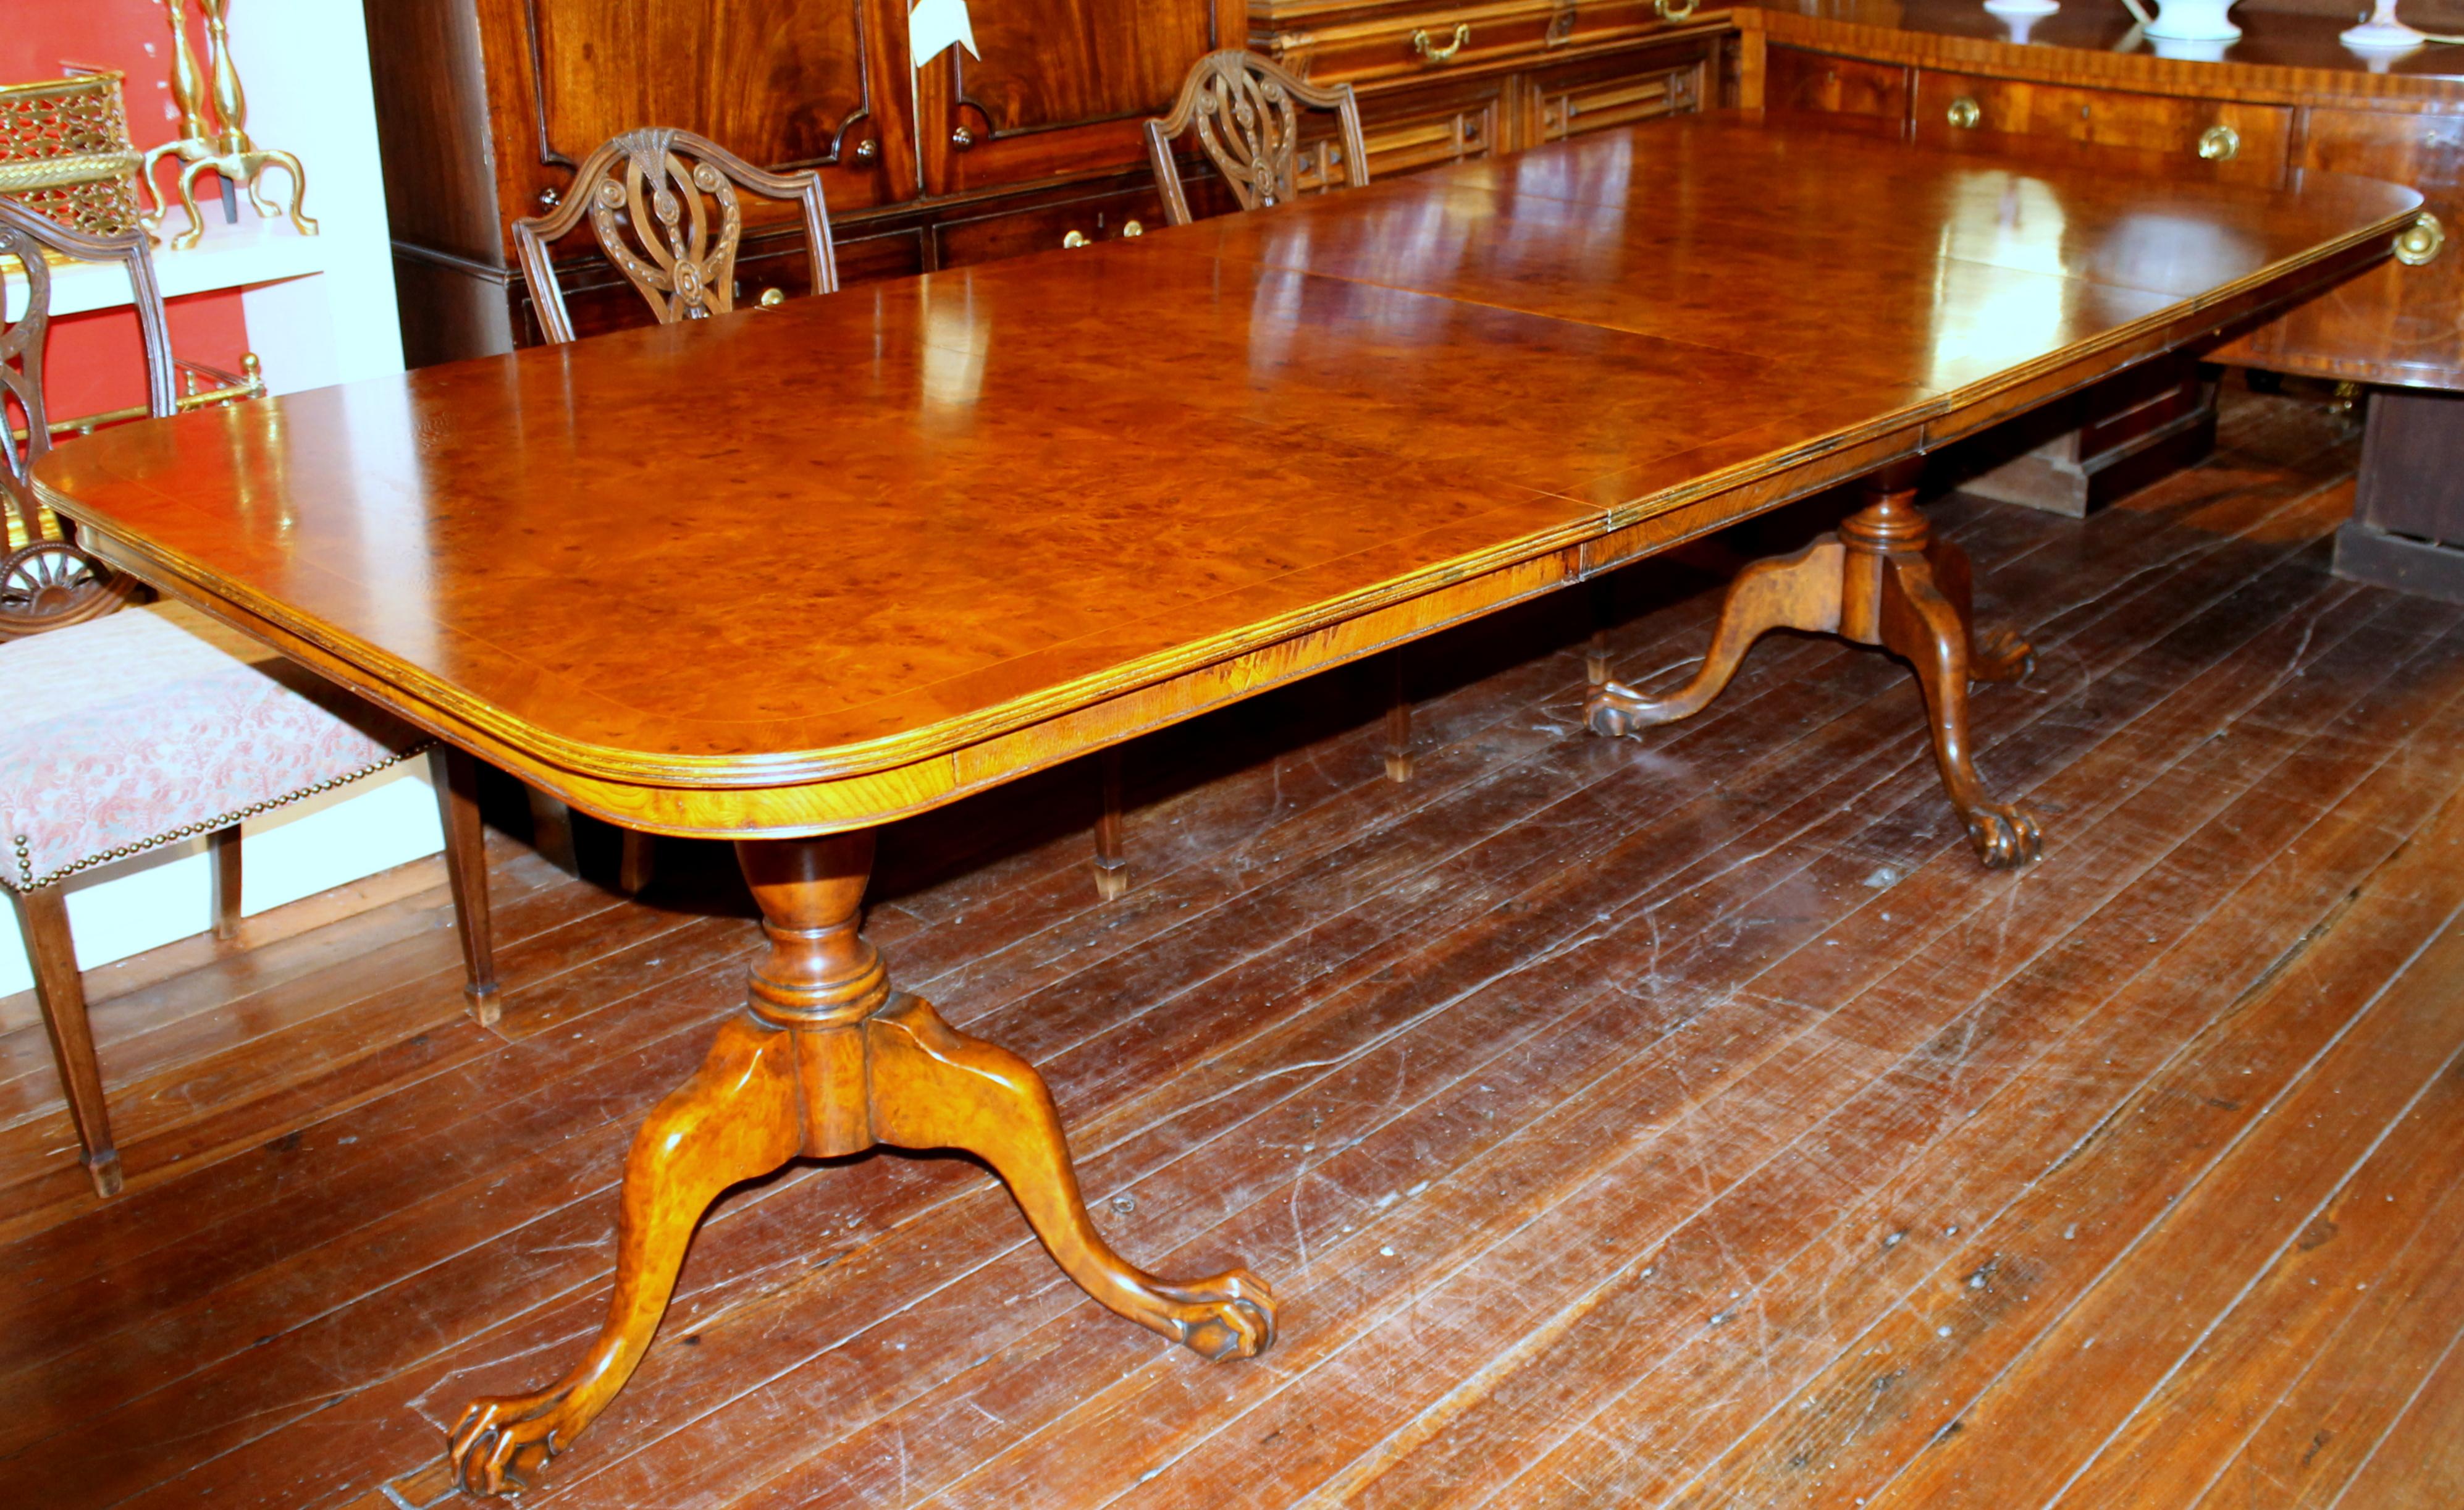 Fabulous Quality Old English Inlaid Book-matched Burr Walnut Chippendale Style Two Pedestal, Two Leaf Dining Table.  Exceptional highly figured veneers on top; figured apron all the way 'round.  Very Rare to find a table of this size in highly